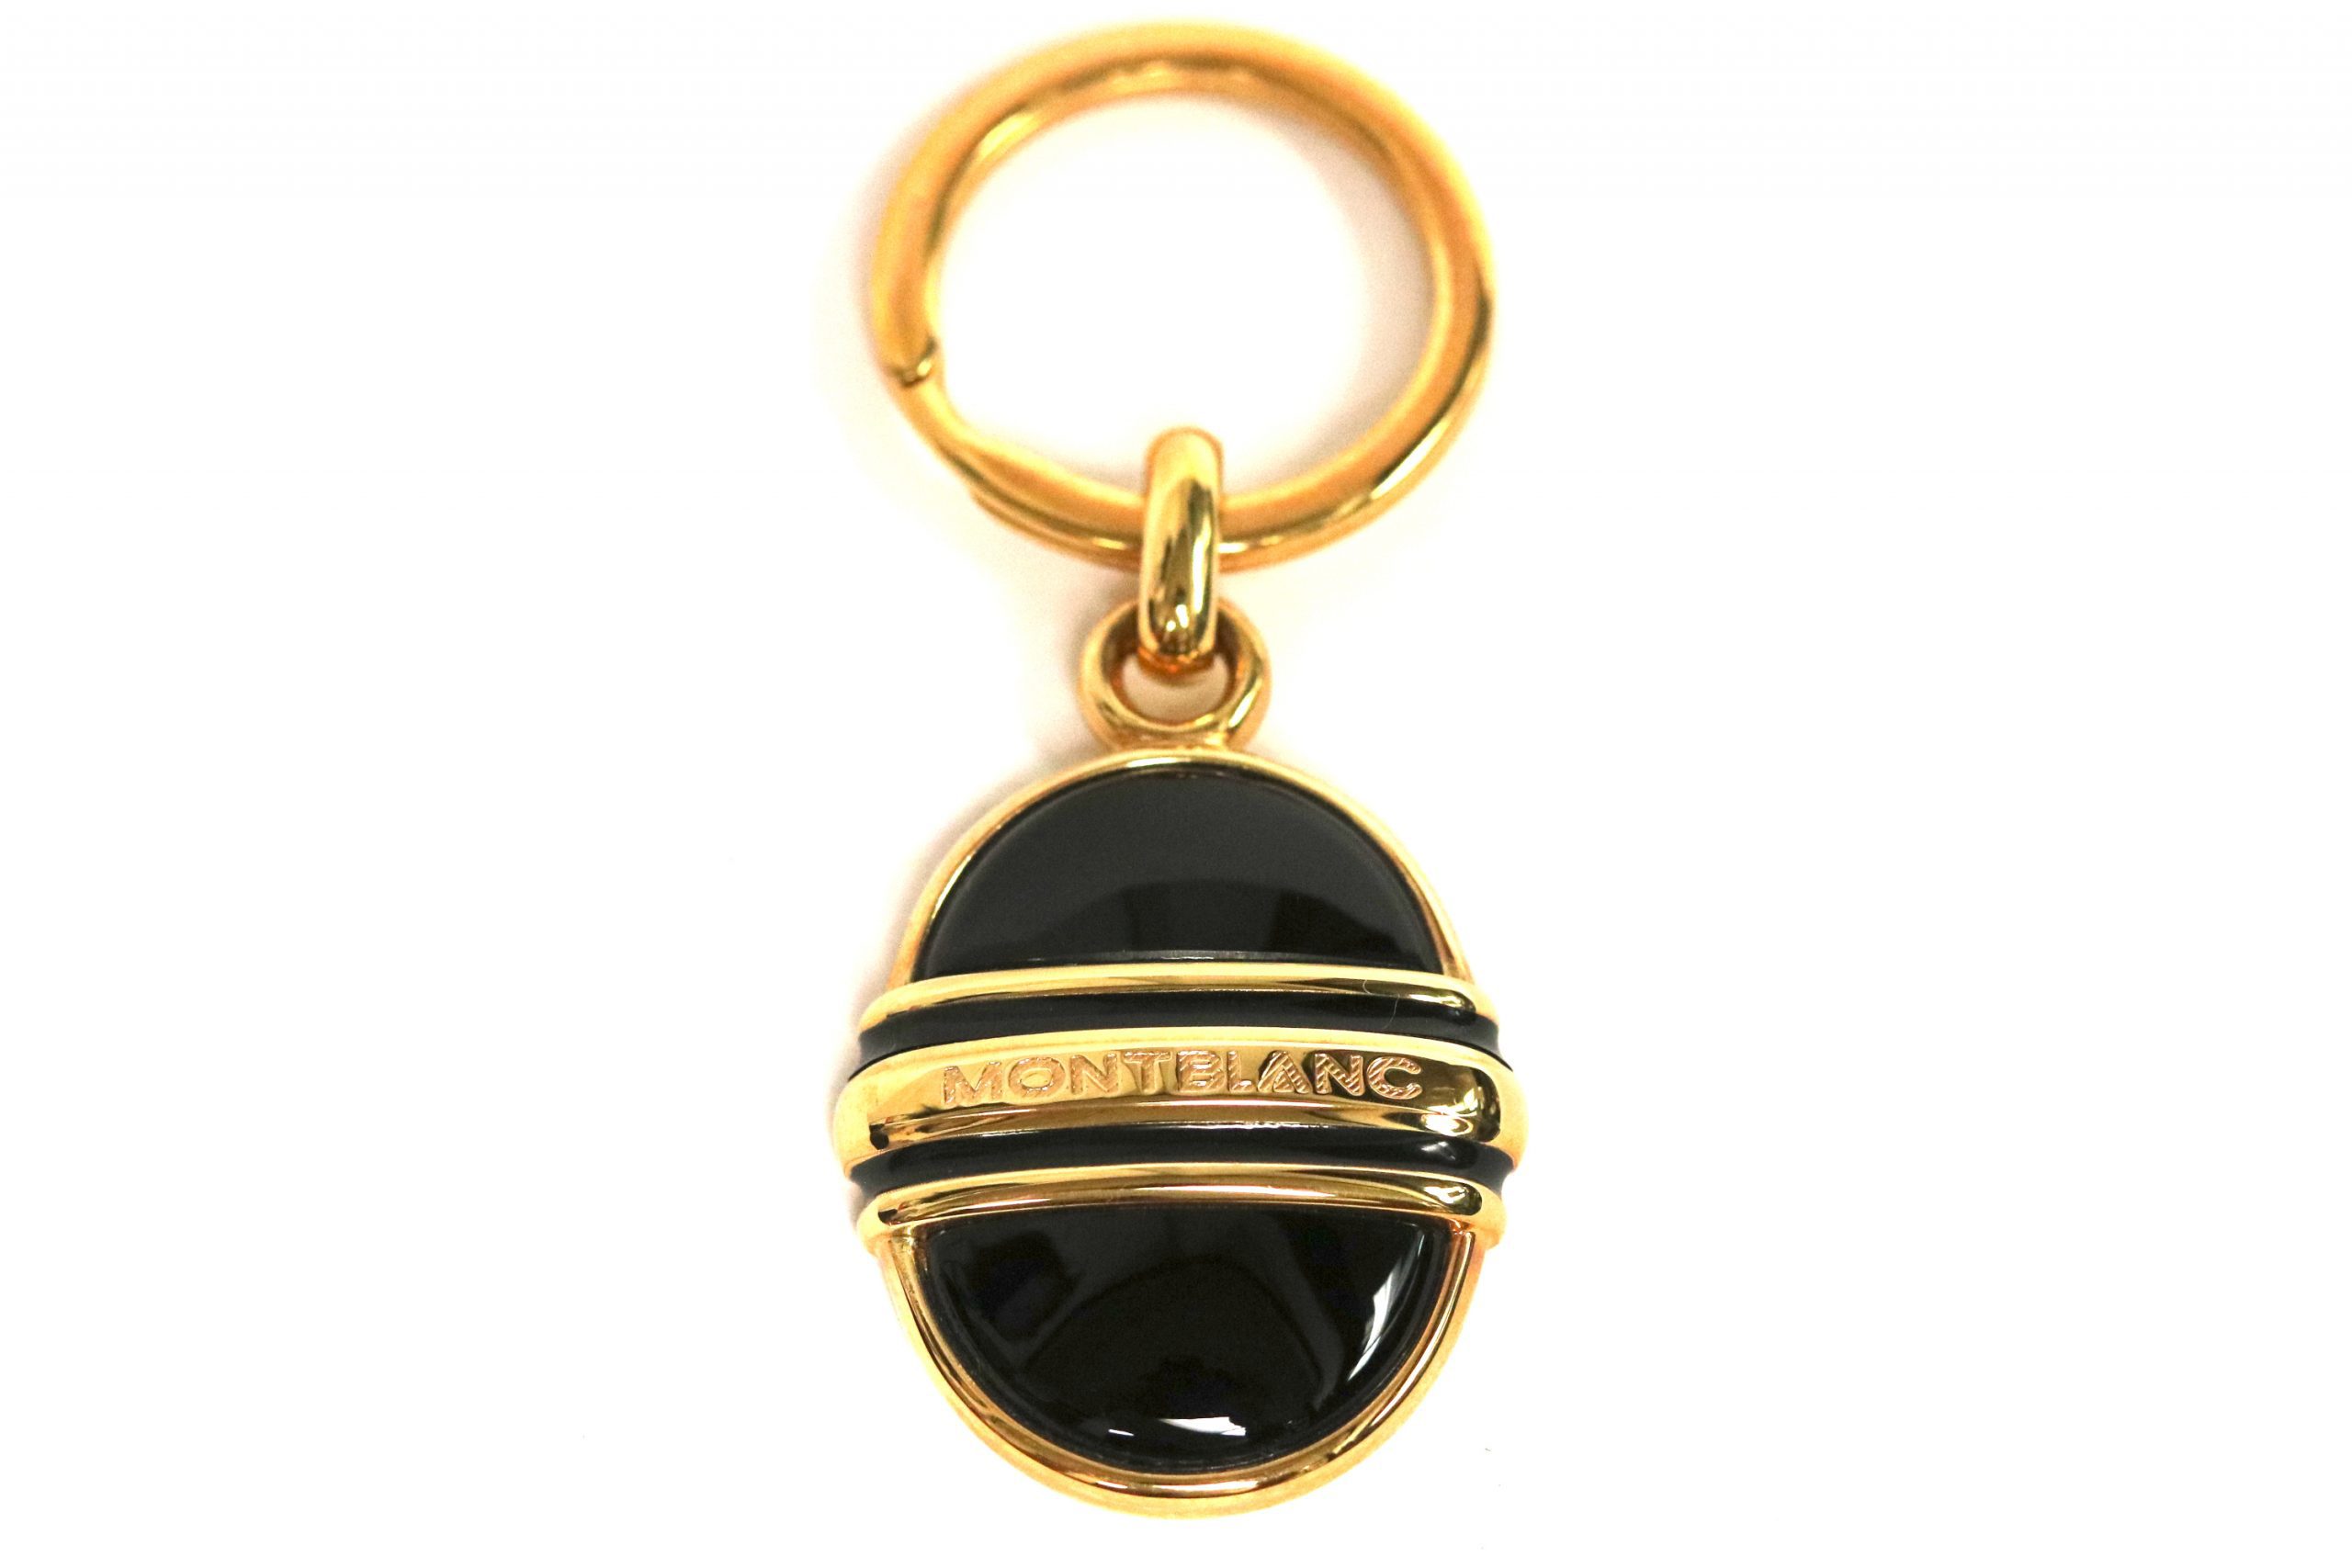 Wadsfred 20Pcs/Lot Key Ring Key Chain ( Ring Size 28mm) Fashion Gold Color Rhodium Black Colors Plated 50mm